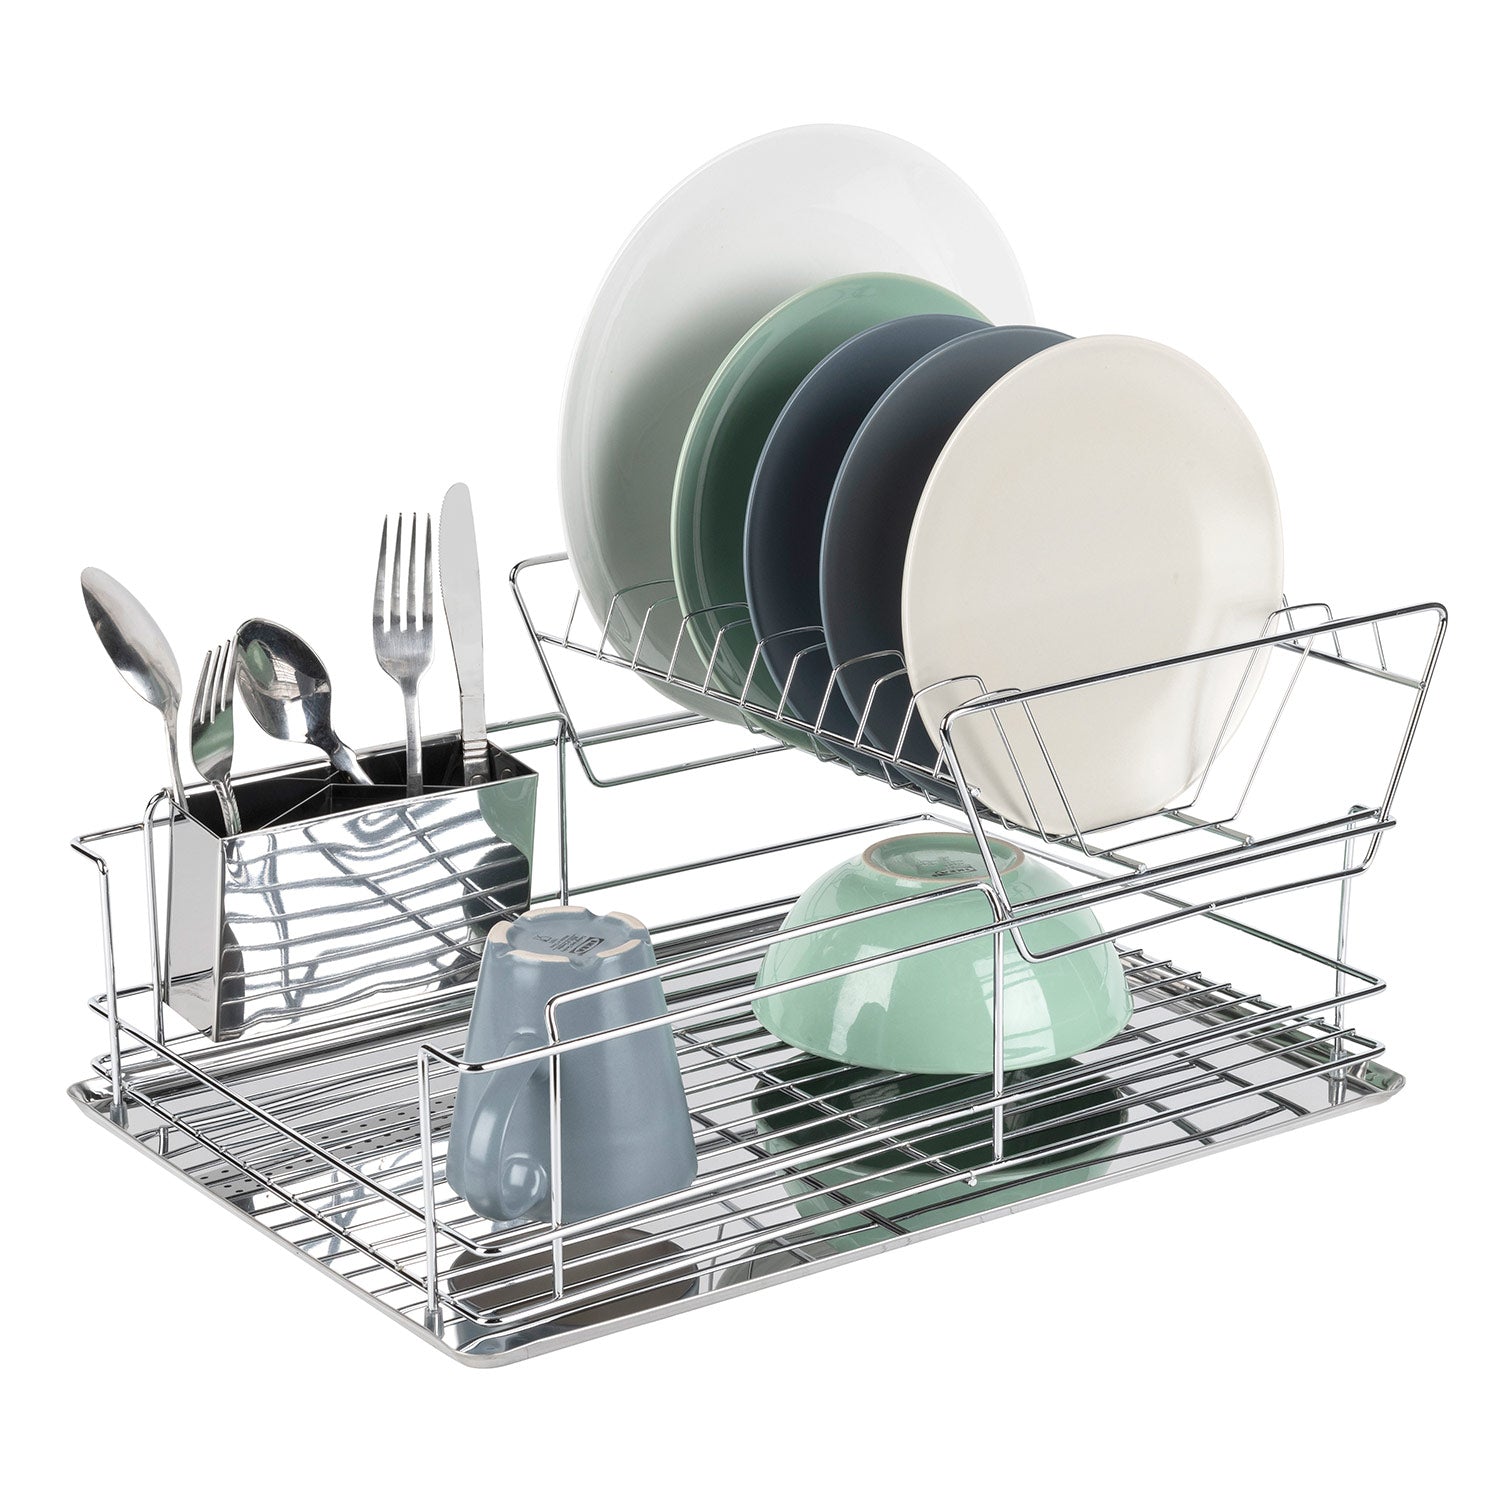 Premius 2 Tier Chrome Finished Dish Rack, Silver, 18.5x13x9 Inches